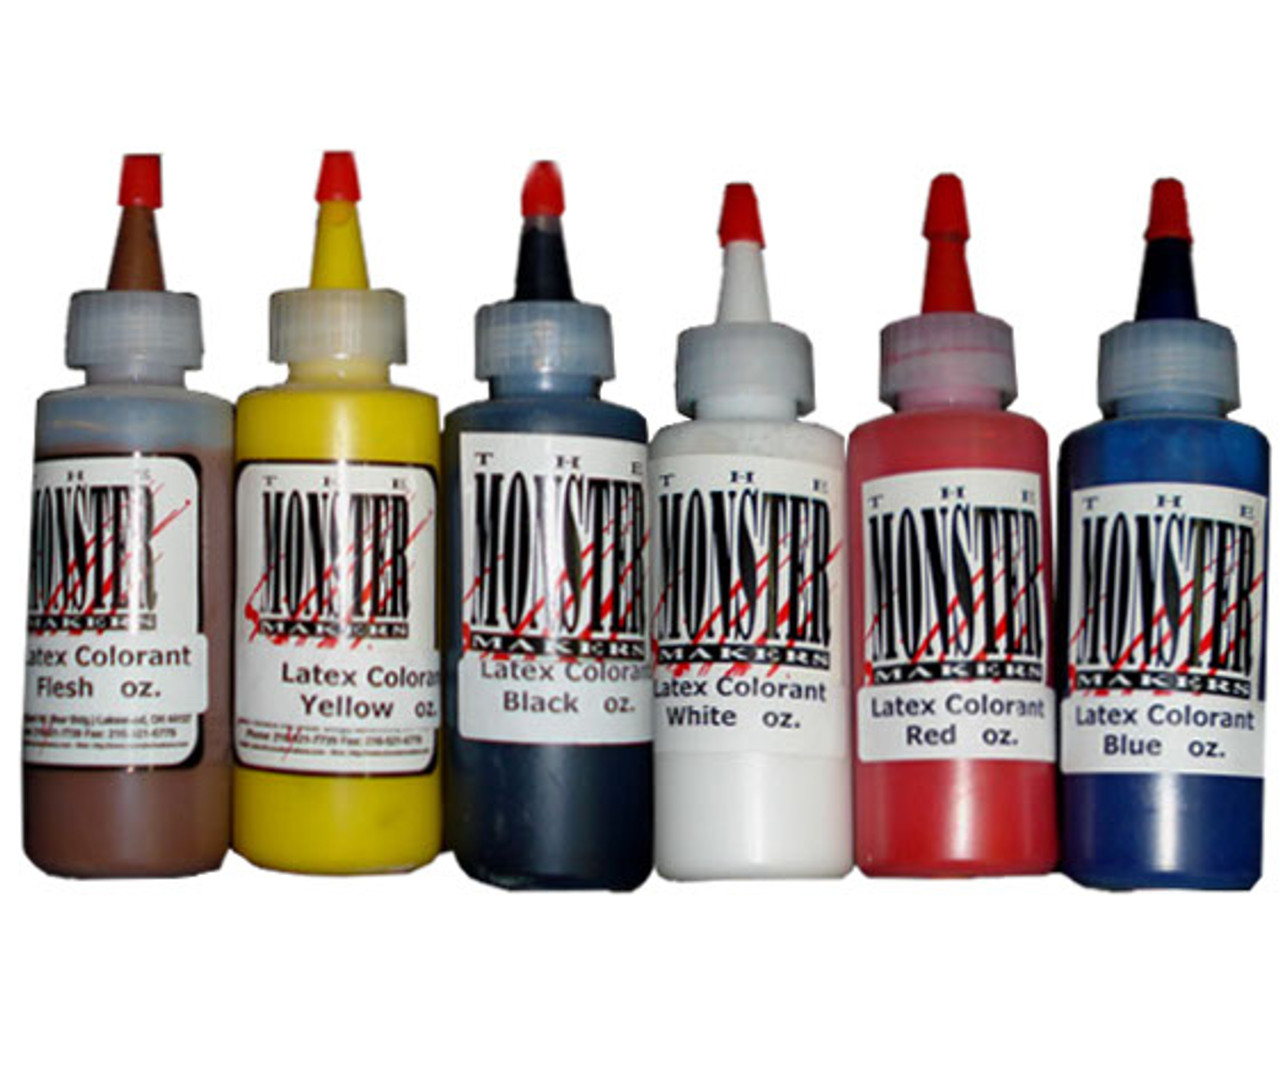 Monster Makers Latex Colorant 4oz Kit - The Engineer Guy